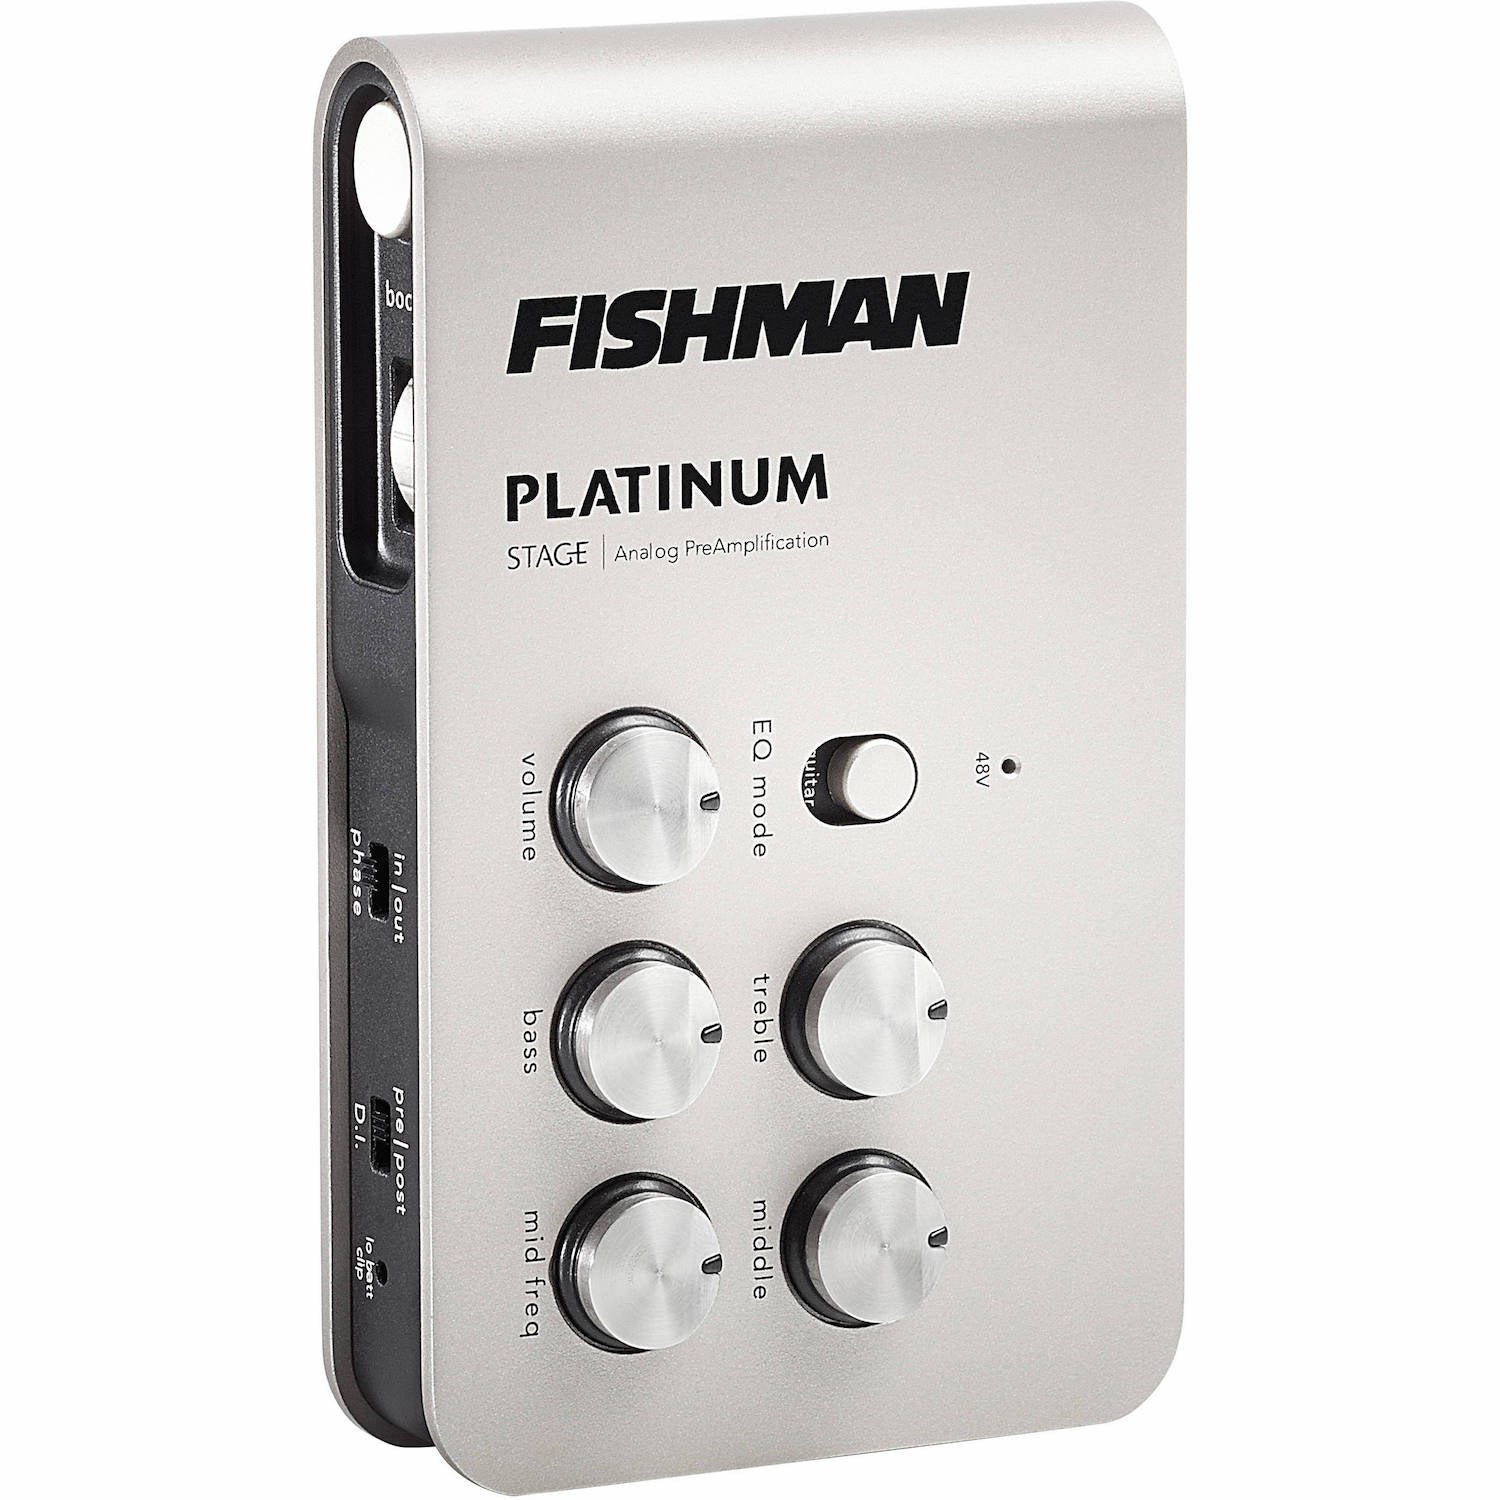 Fishman Platinum Stage Analog Acoustic Preamp